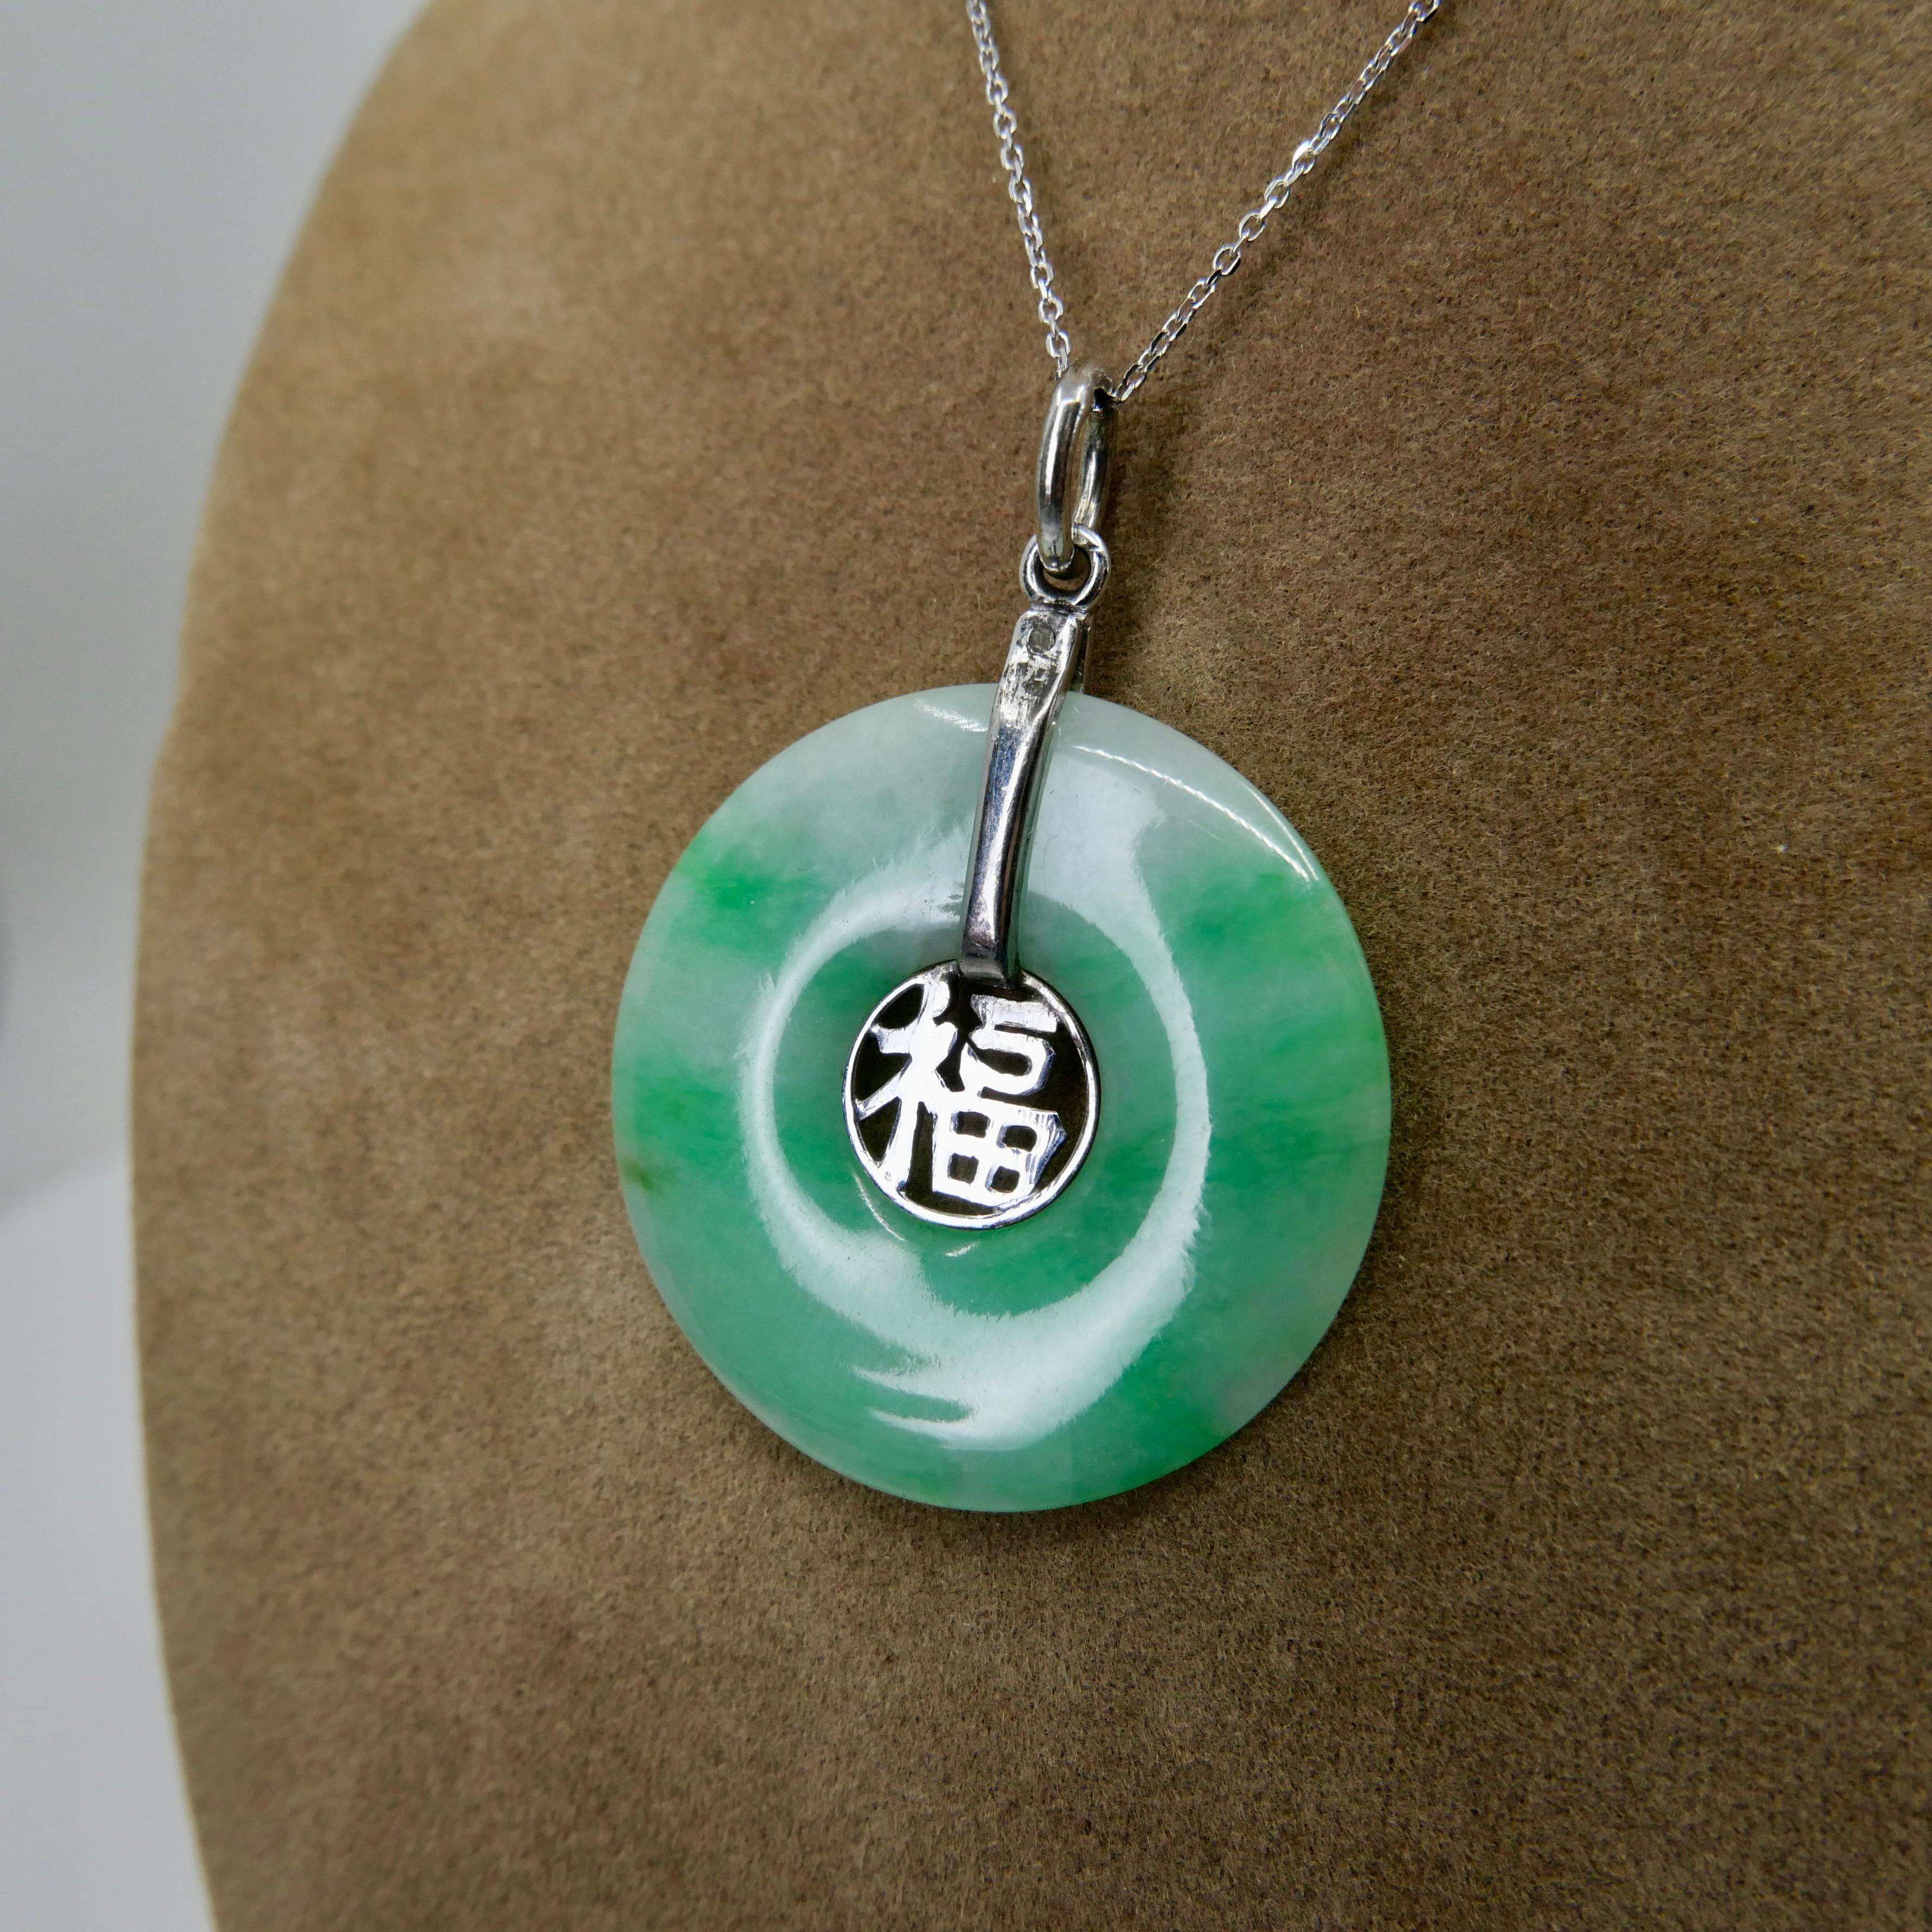 Round Cut Vintage Certified Type A Jade Good Fortune Pendant Necklace, Apple Green Patches For Sale